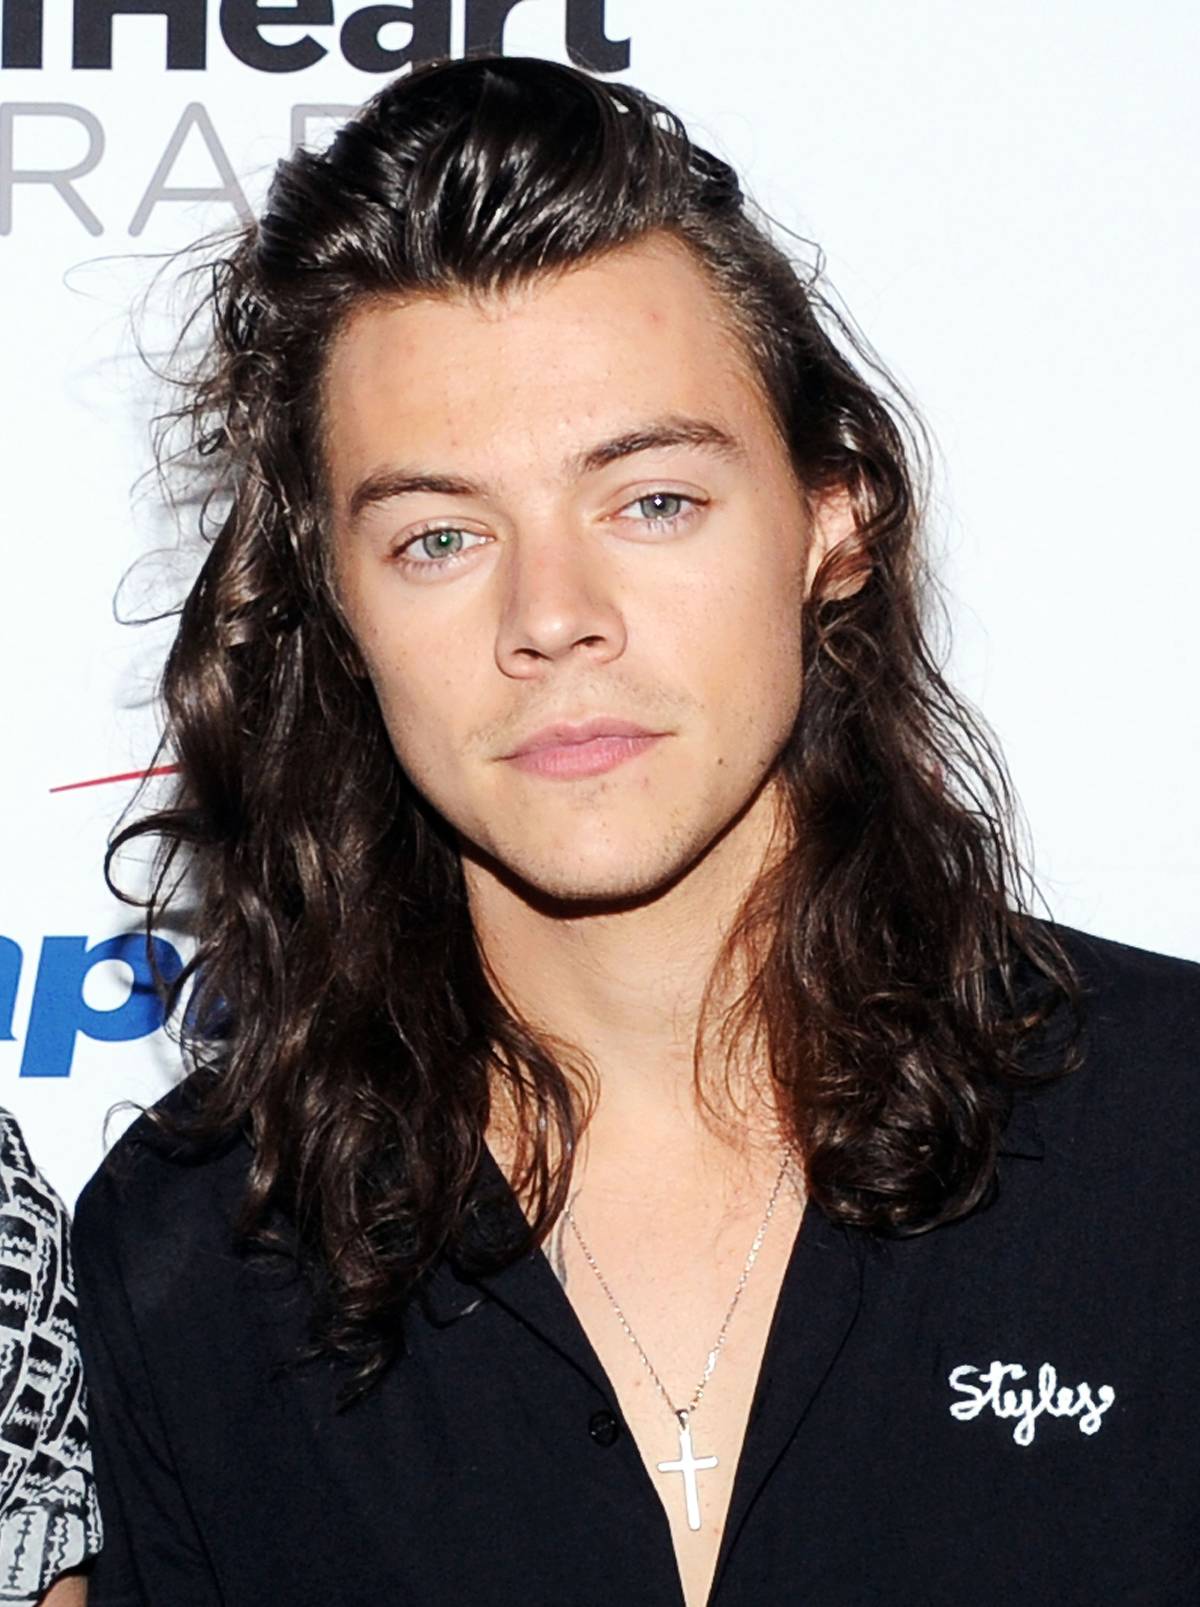 Harry Styles Rocks Long Hair Again for 'AnOther Man' Magazine